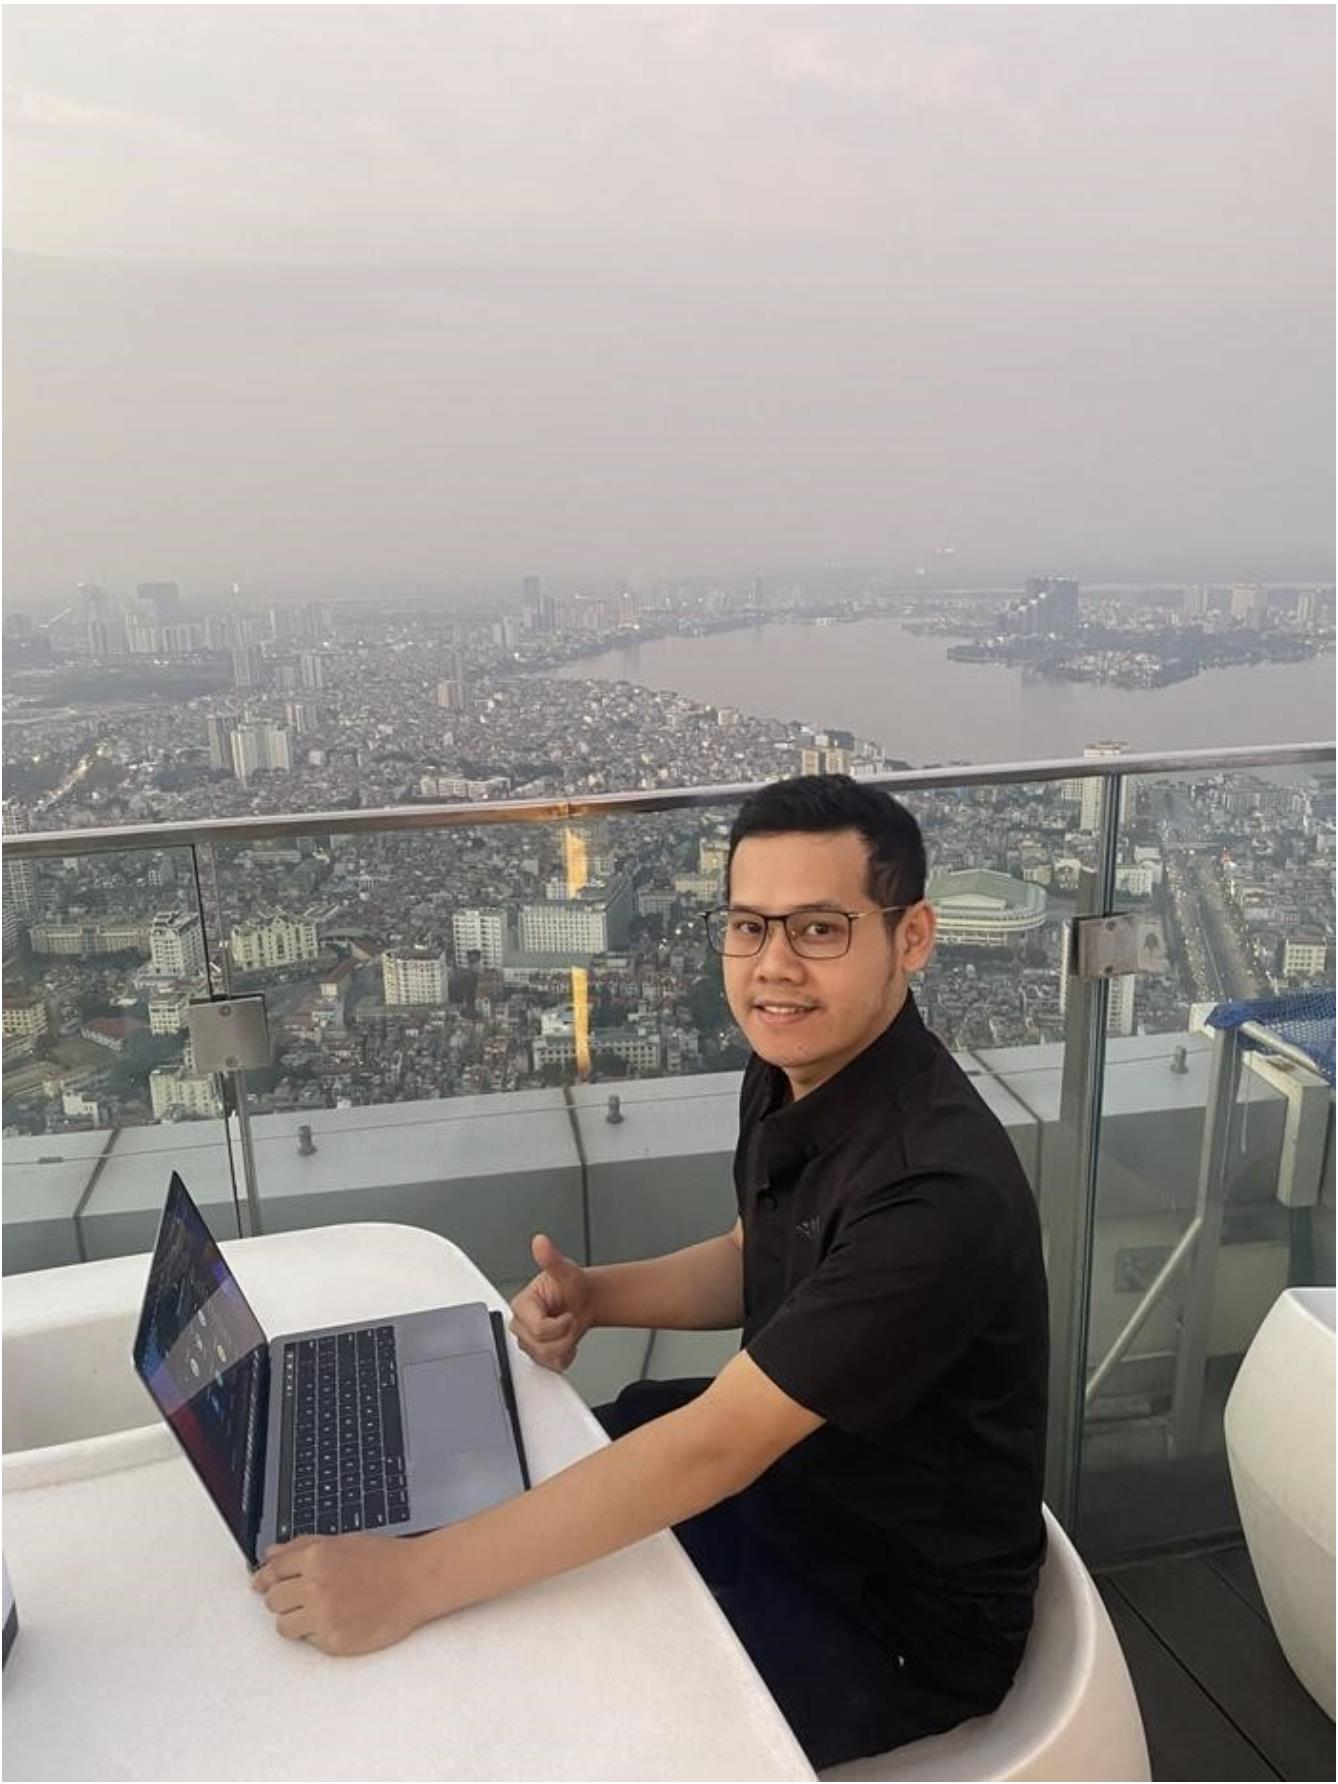 The success story of “provincial IT guy” Dinh Ngoc Cuong